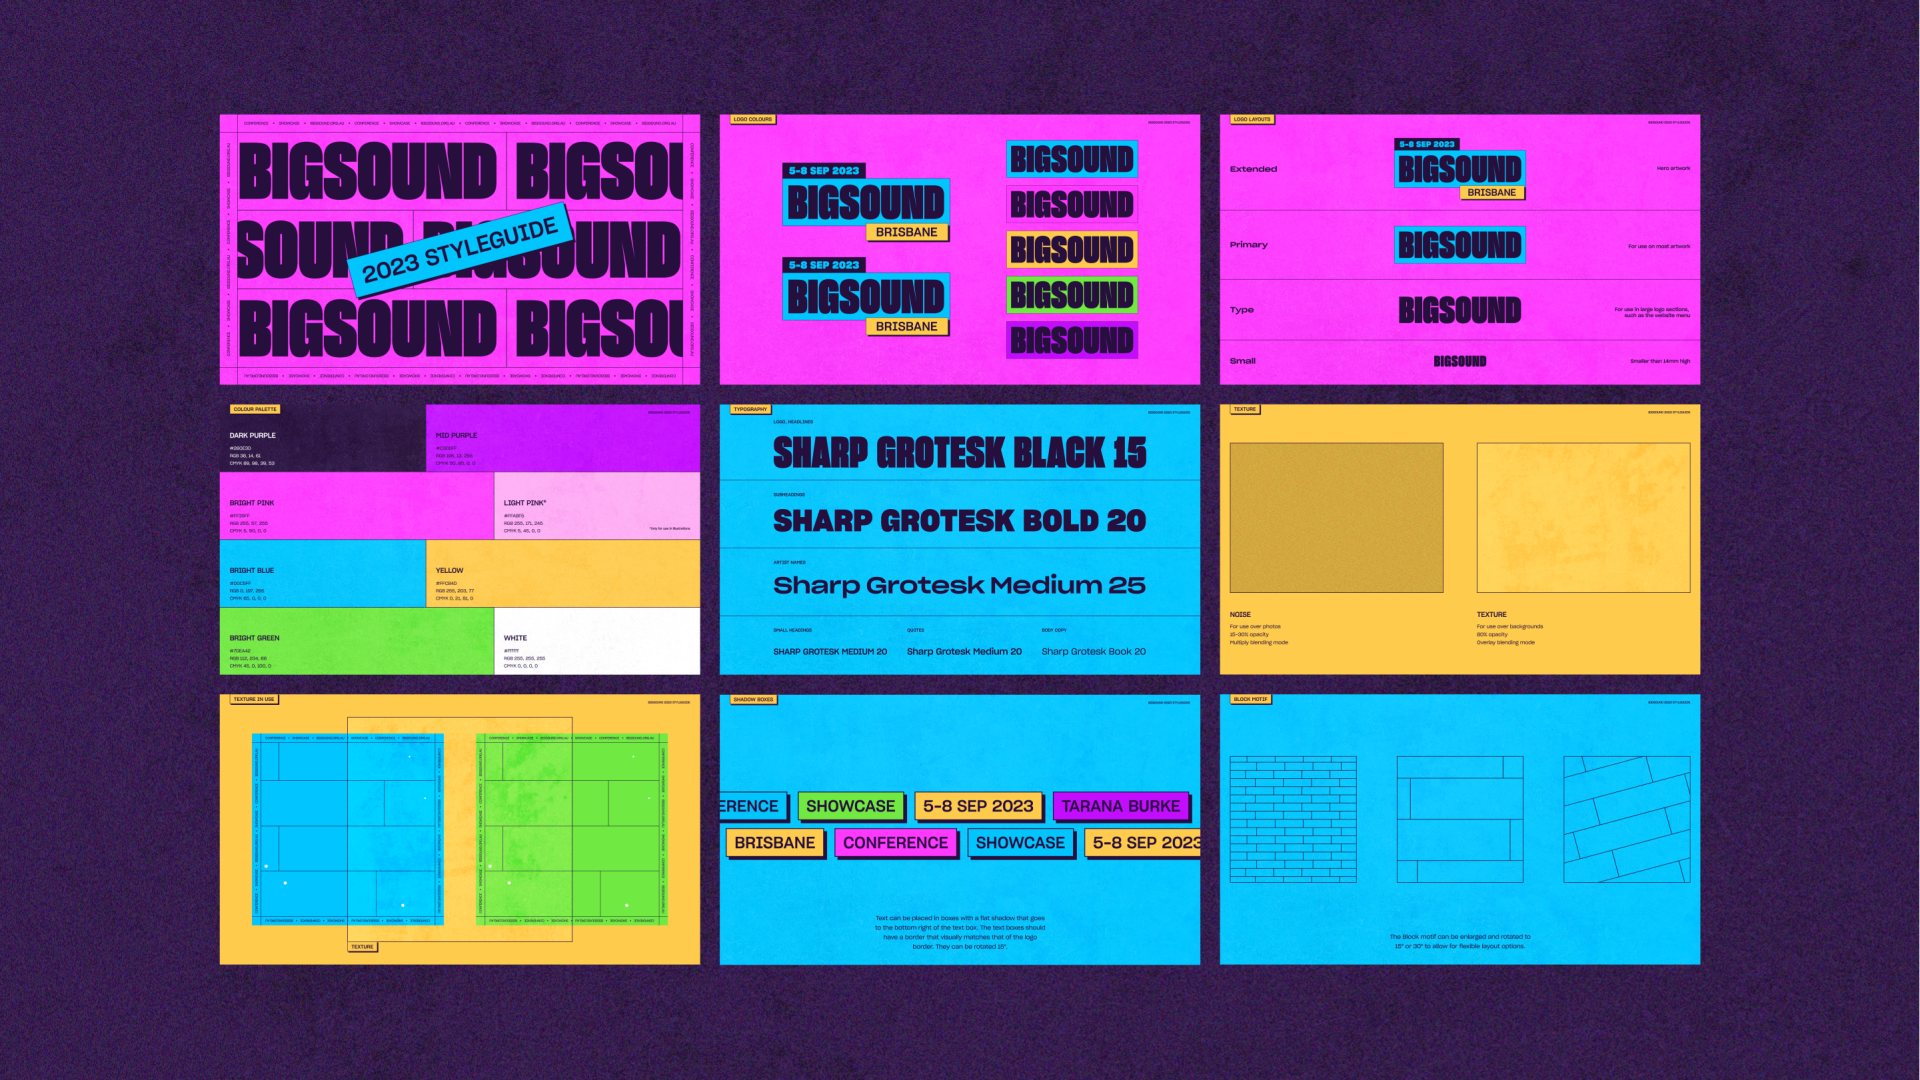 Pages from the Bigsound 2023 styleguide including logo rules, colour palette, and graphic devices